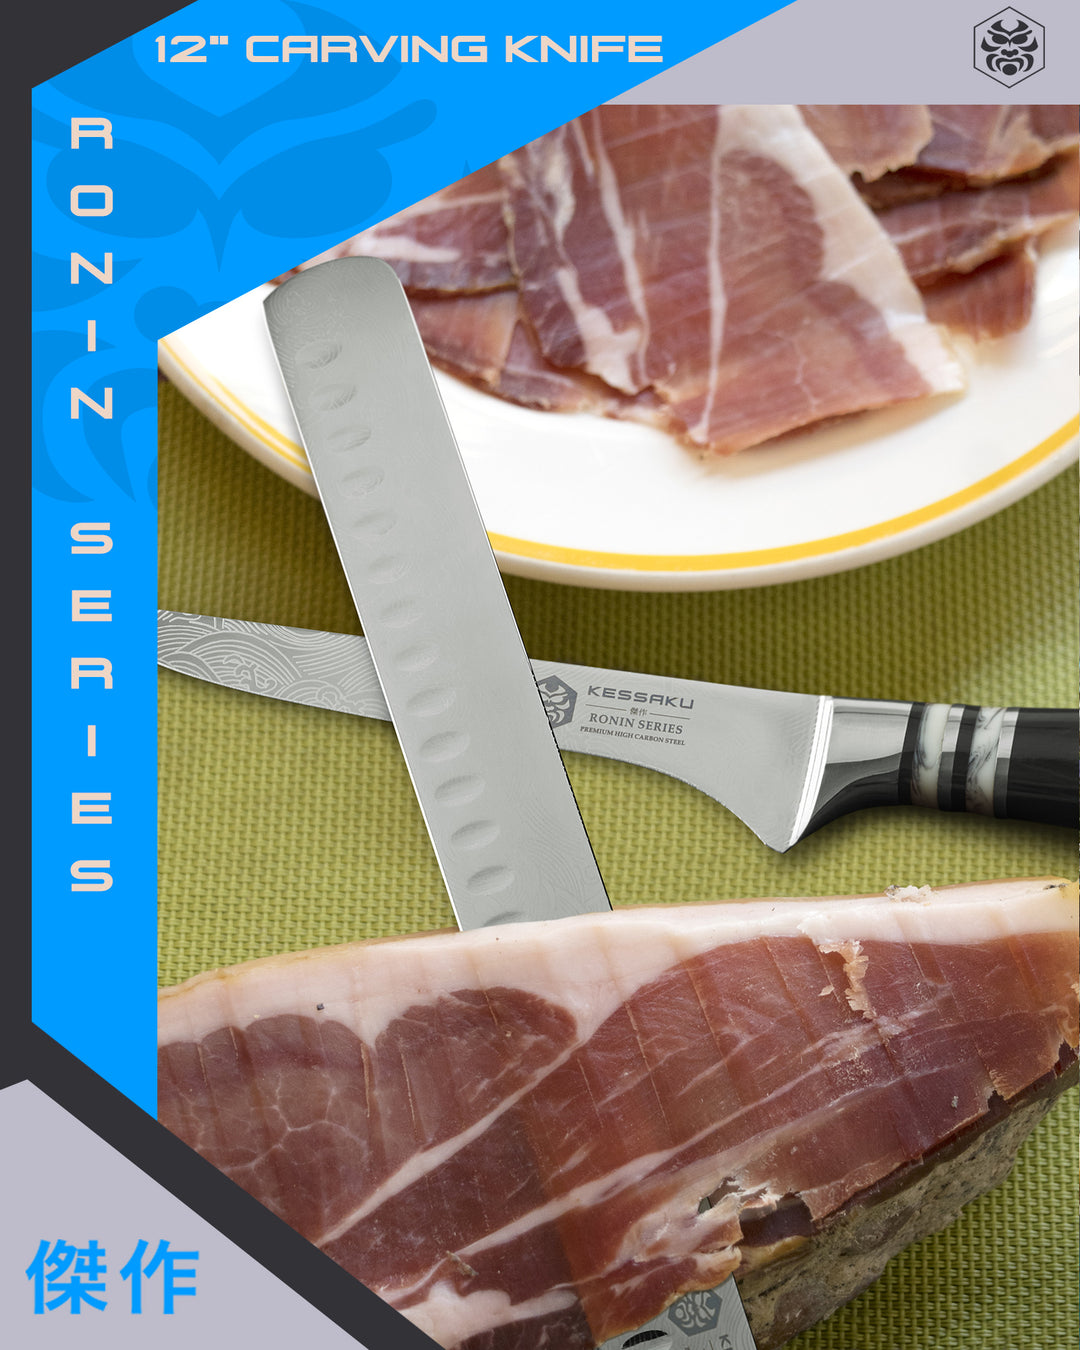 The Ronin Carving Knife used to slice Jamón